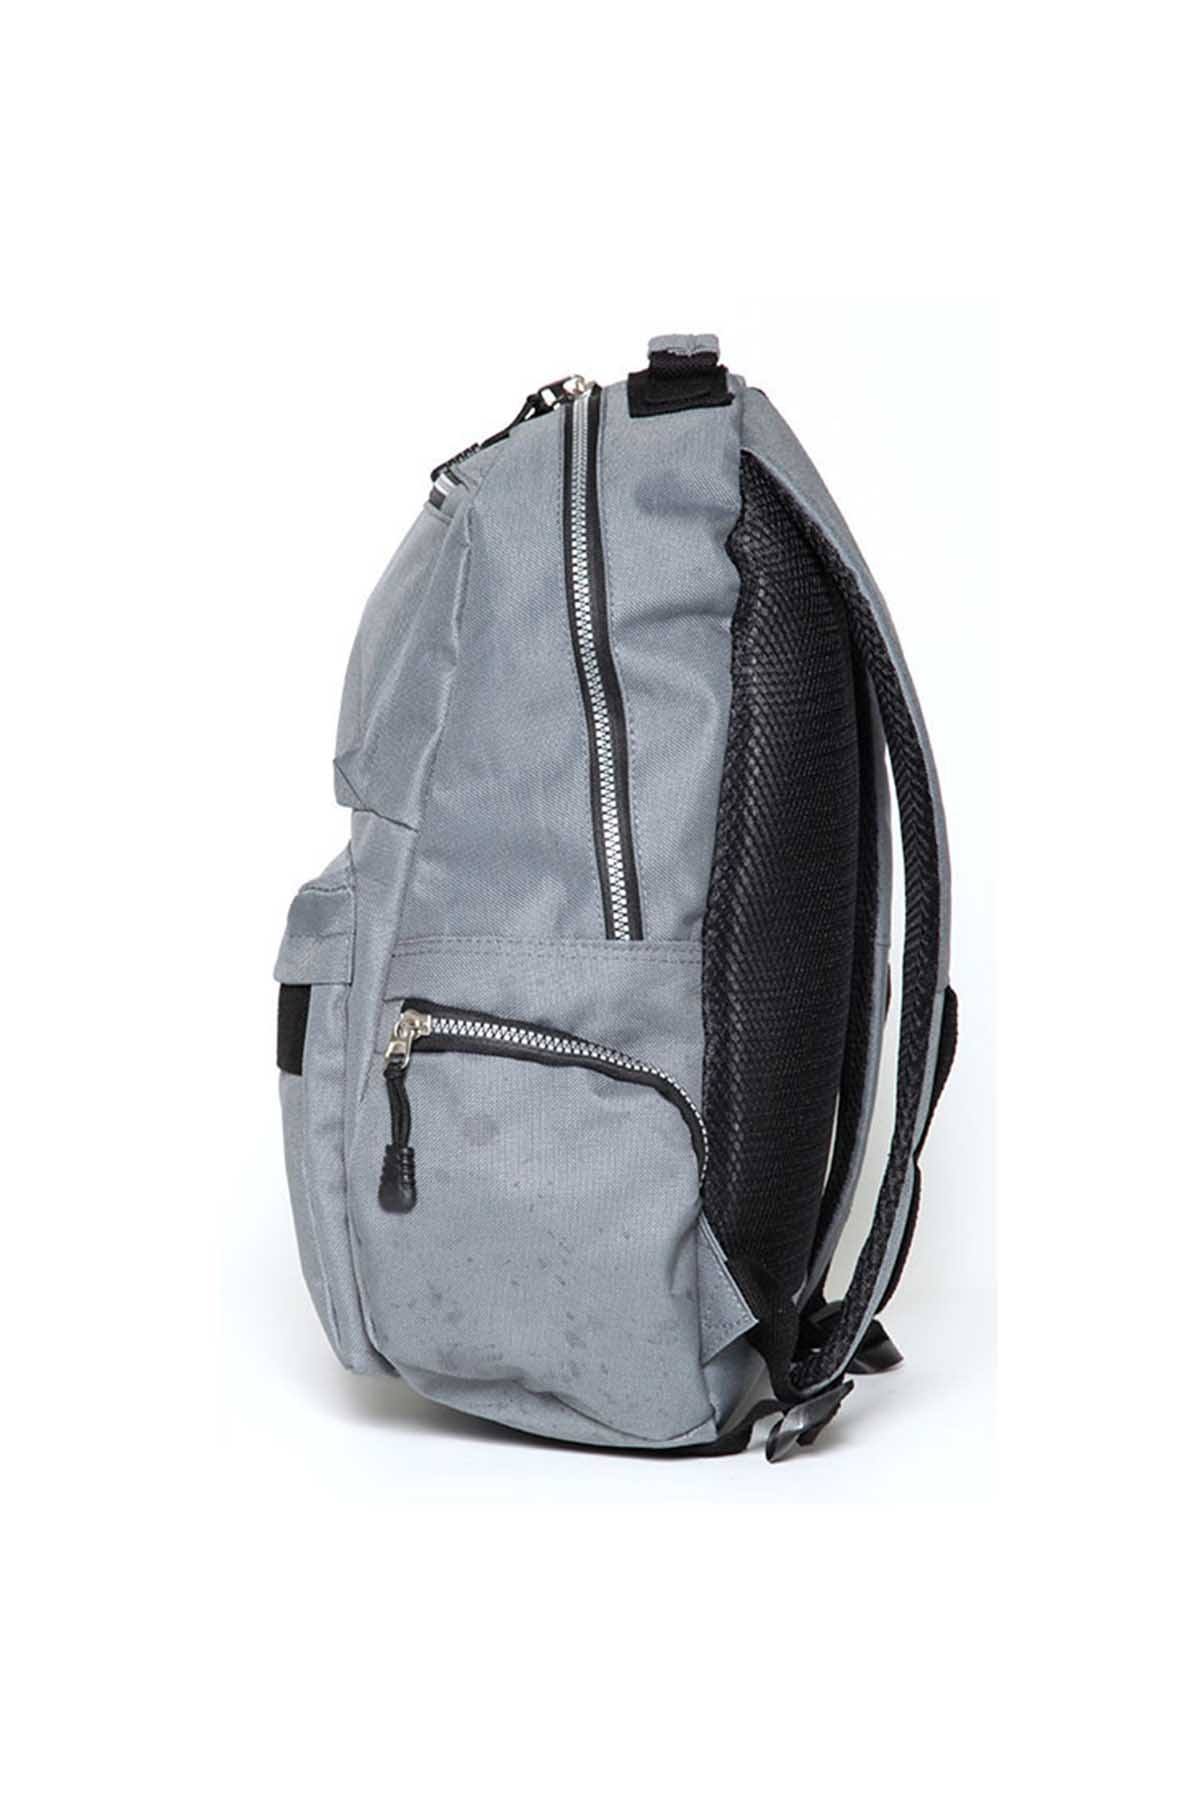 Premium Xpressions Charcoal/Black Laptop-Sleeve Backpack